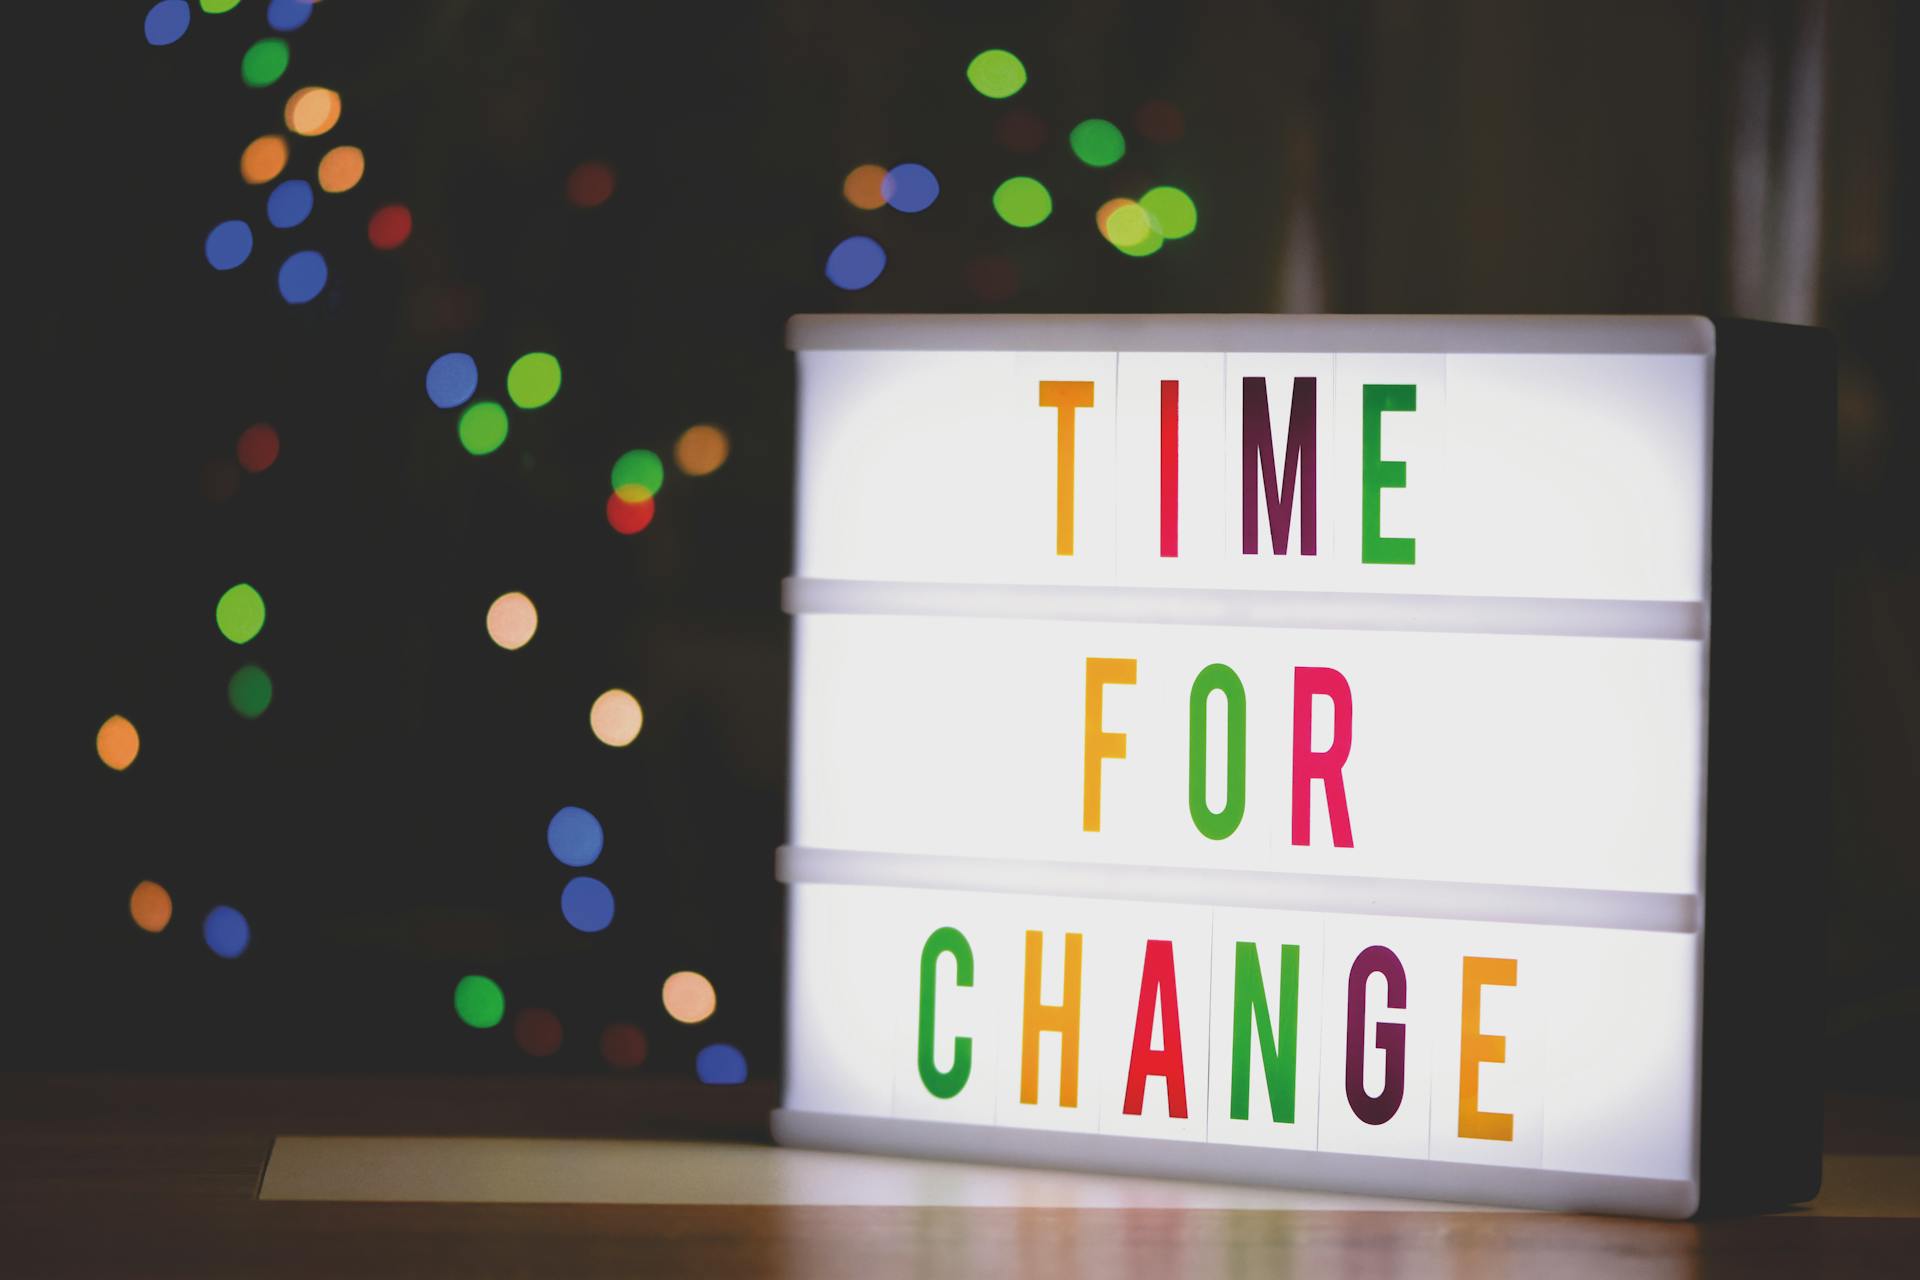 The image is from Pexels.com and shows a light box with the phrase "time for change" spelled out in rainbow lettering. Multicolor lights are seen against a dark backdrop.